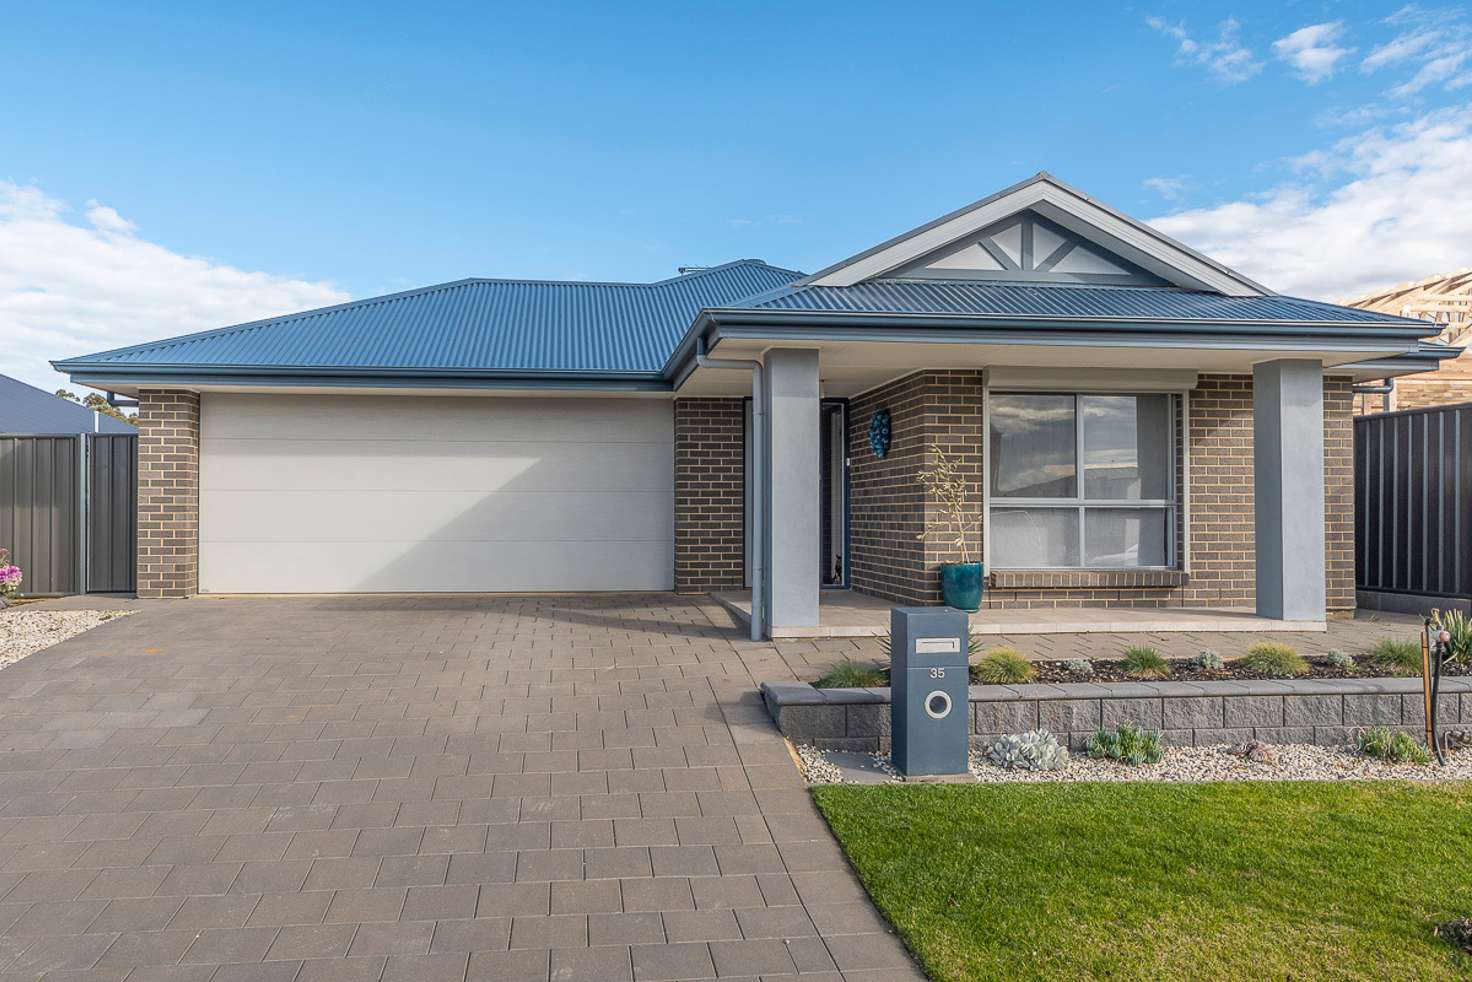 Main view of Homely house listing, 35 Byron St, Mount Barker SA 5251